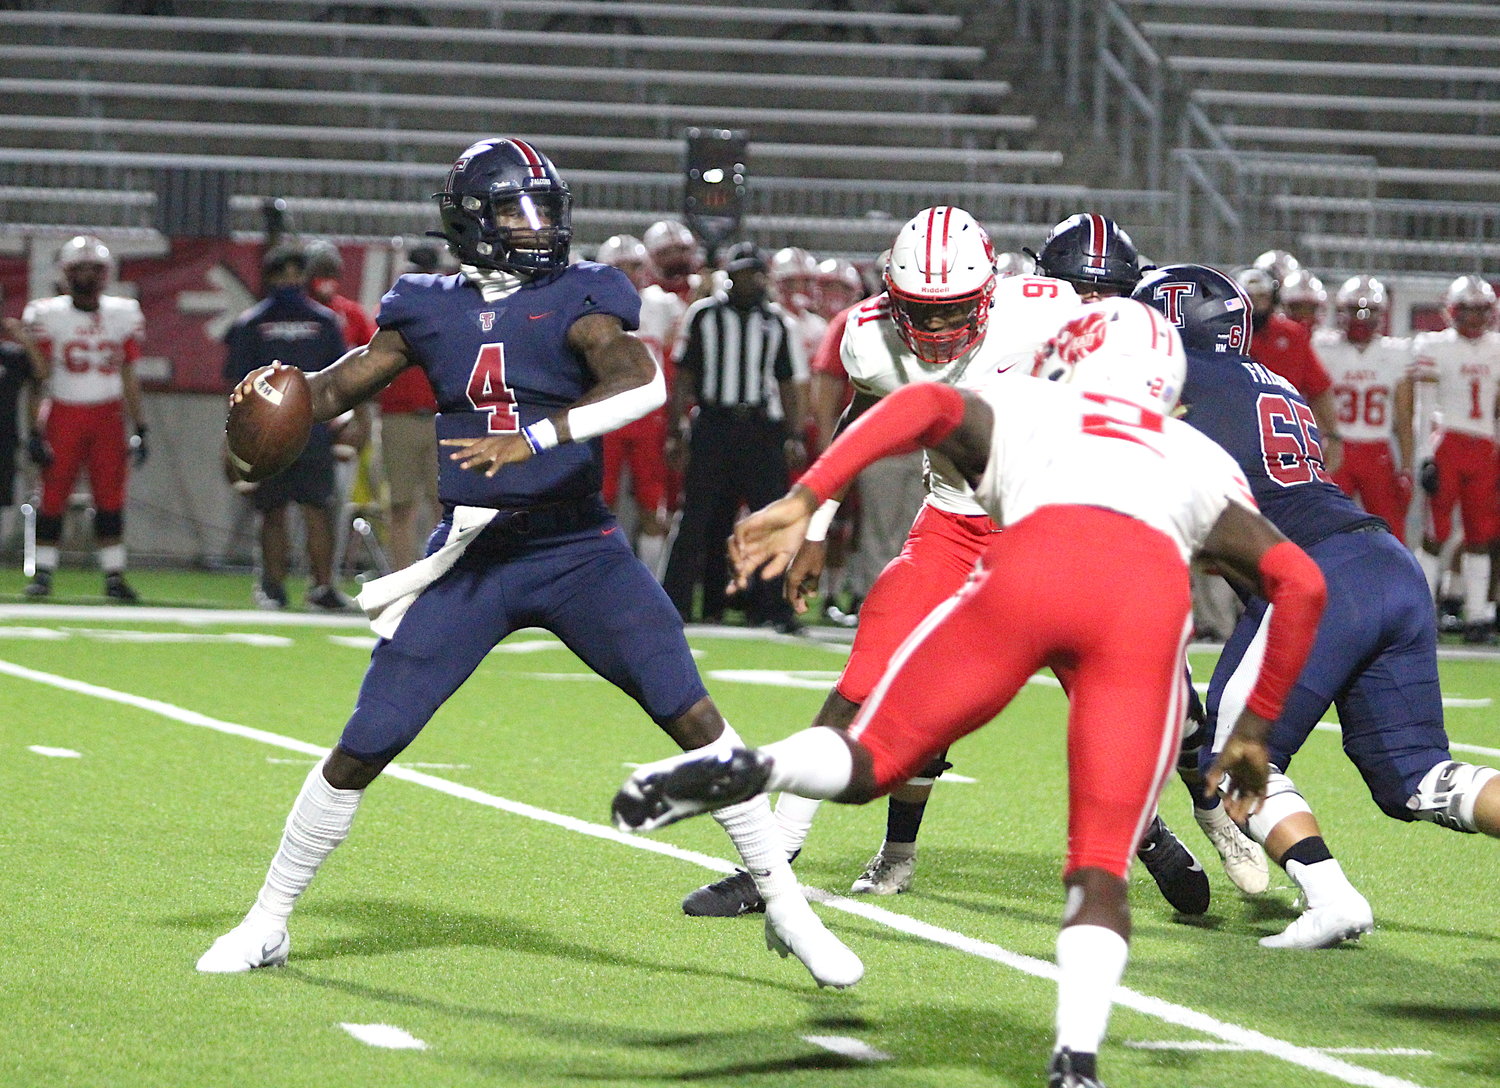 Tompkins senior quarterback Jalen Milroe (4) stands tall in the pocket as Katy junior defensive end Malick Sylla attempts to rush during the Falcons' 24-19 win over Katy on Nov. 5 at Legacy Stadium.